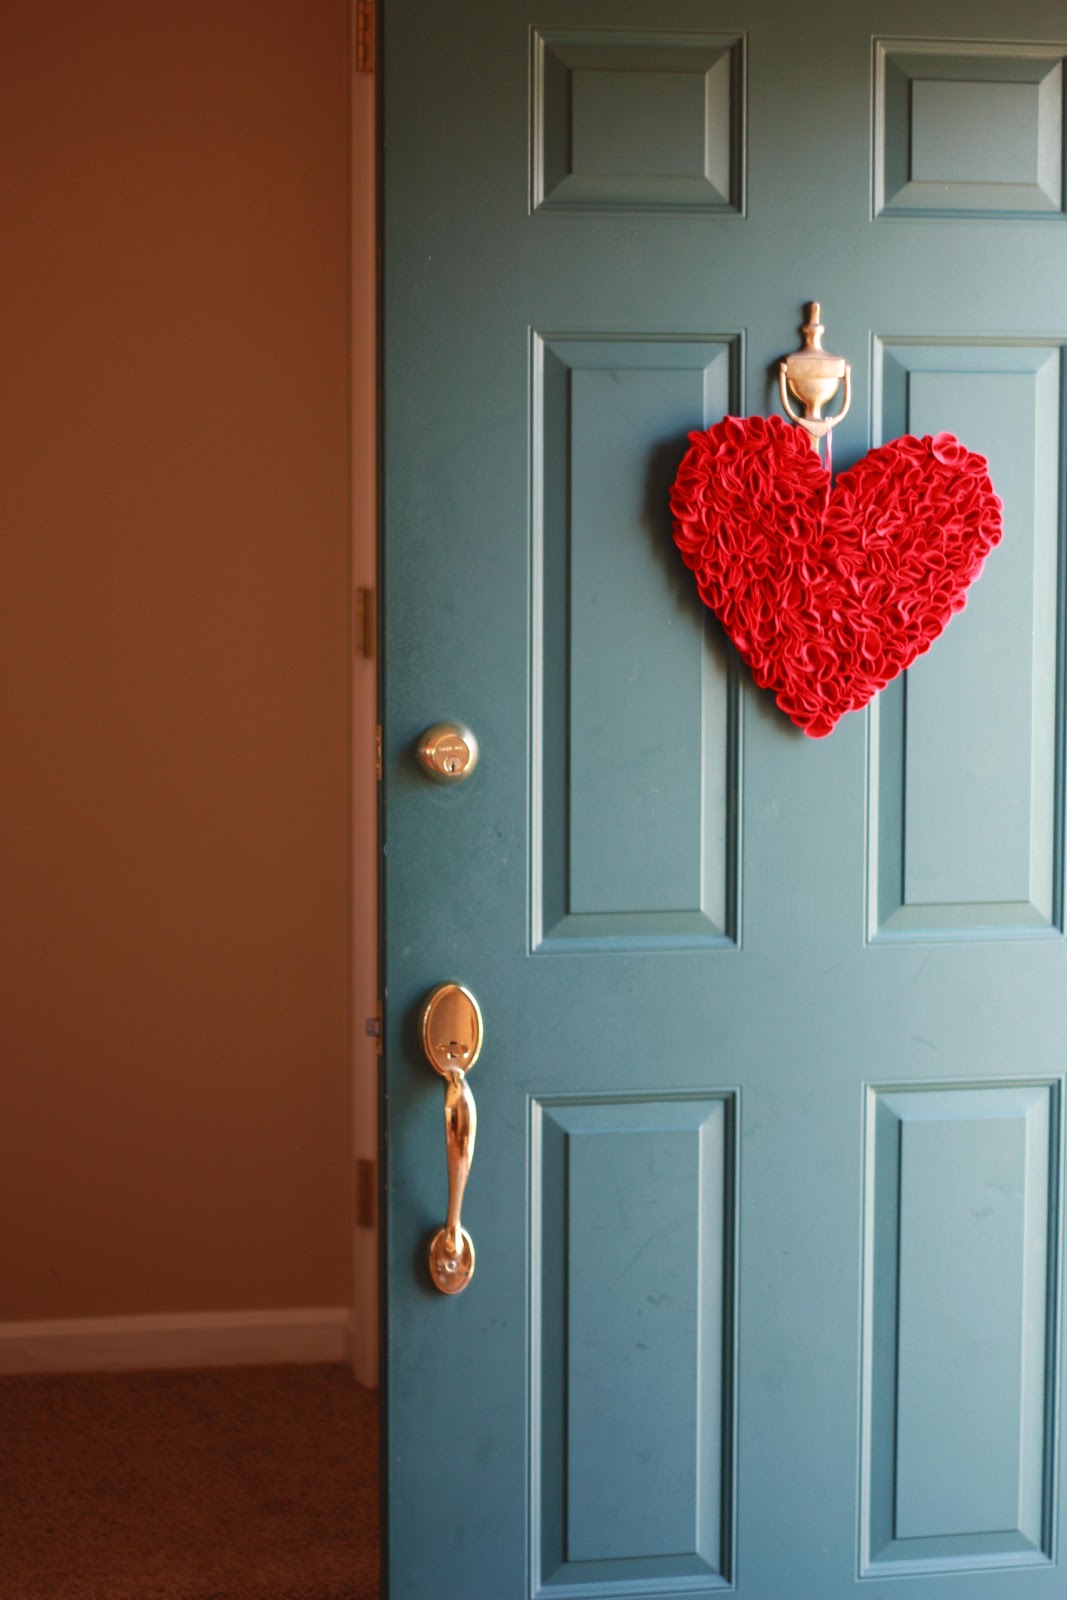 All In One Days Time: Felt Heart Door Decoration Tutorial